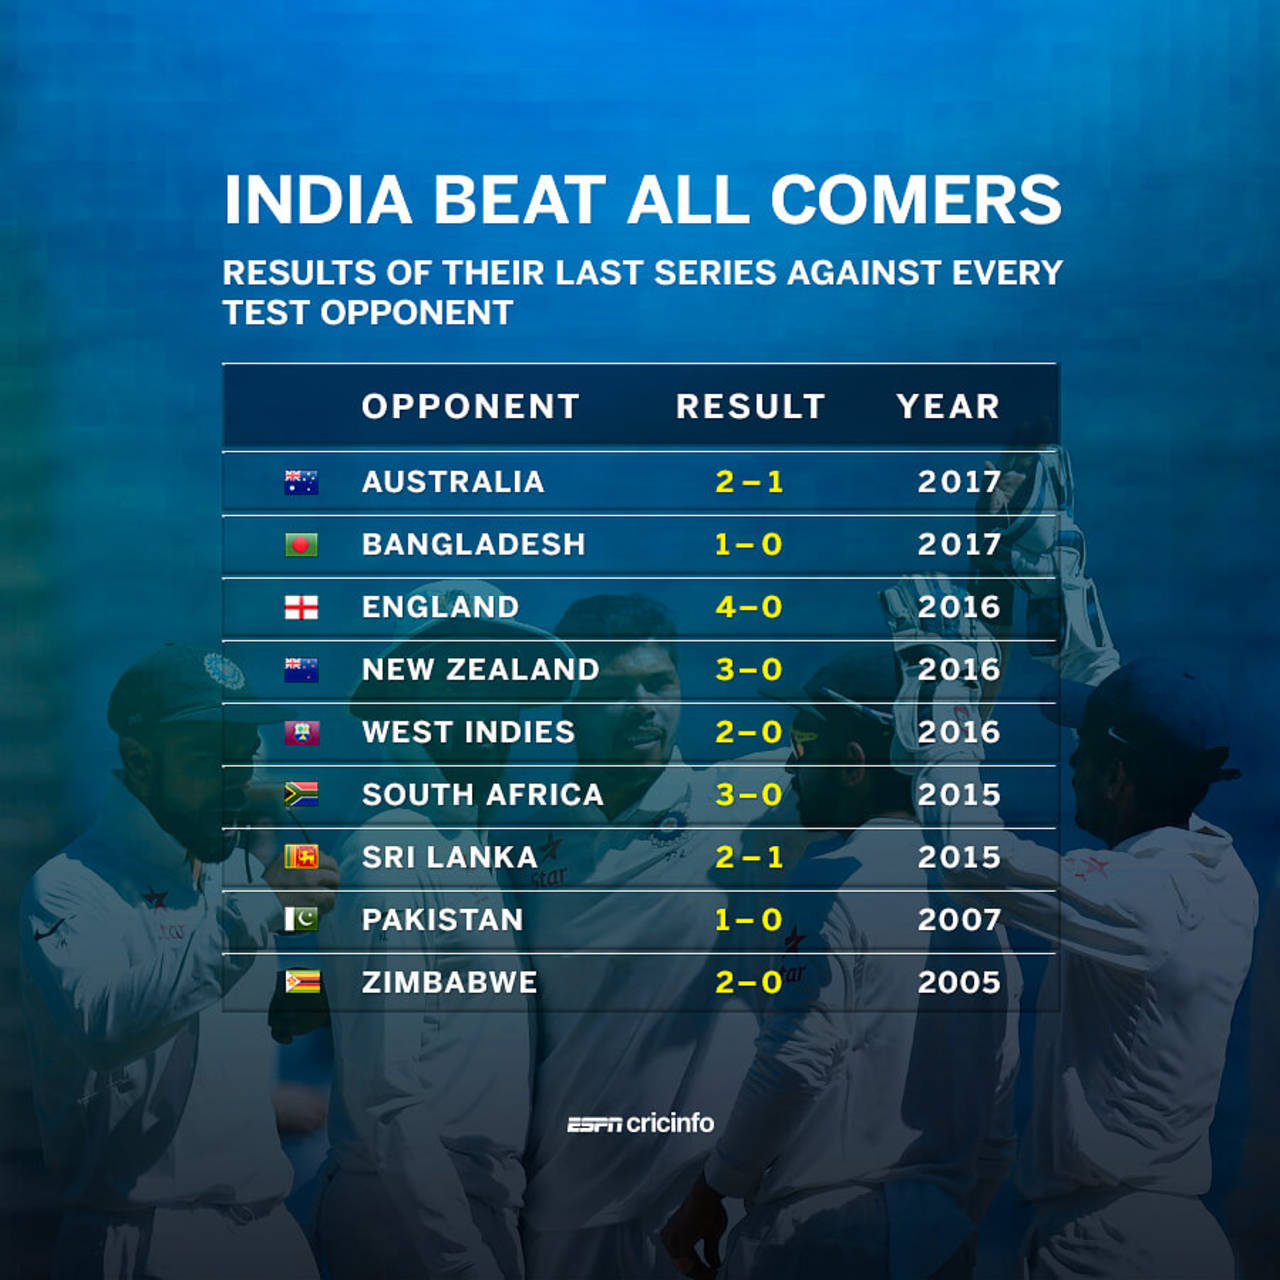 India have won the series against all teams their last contest